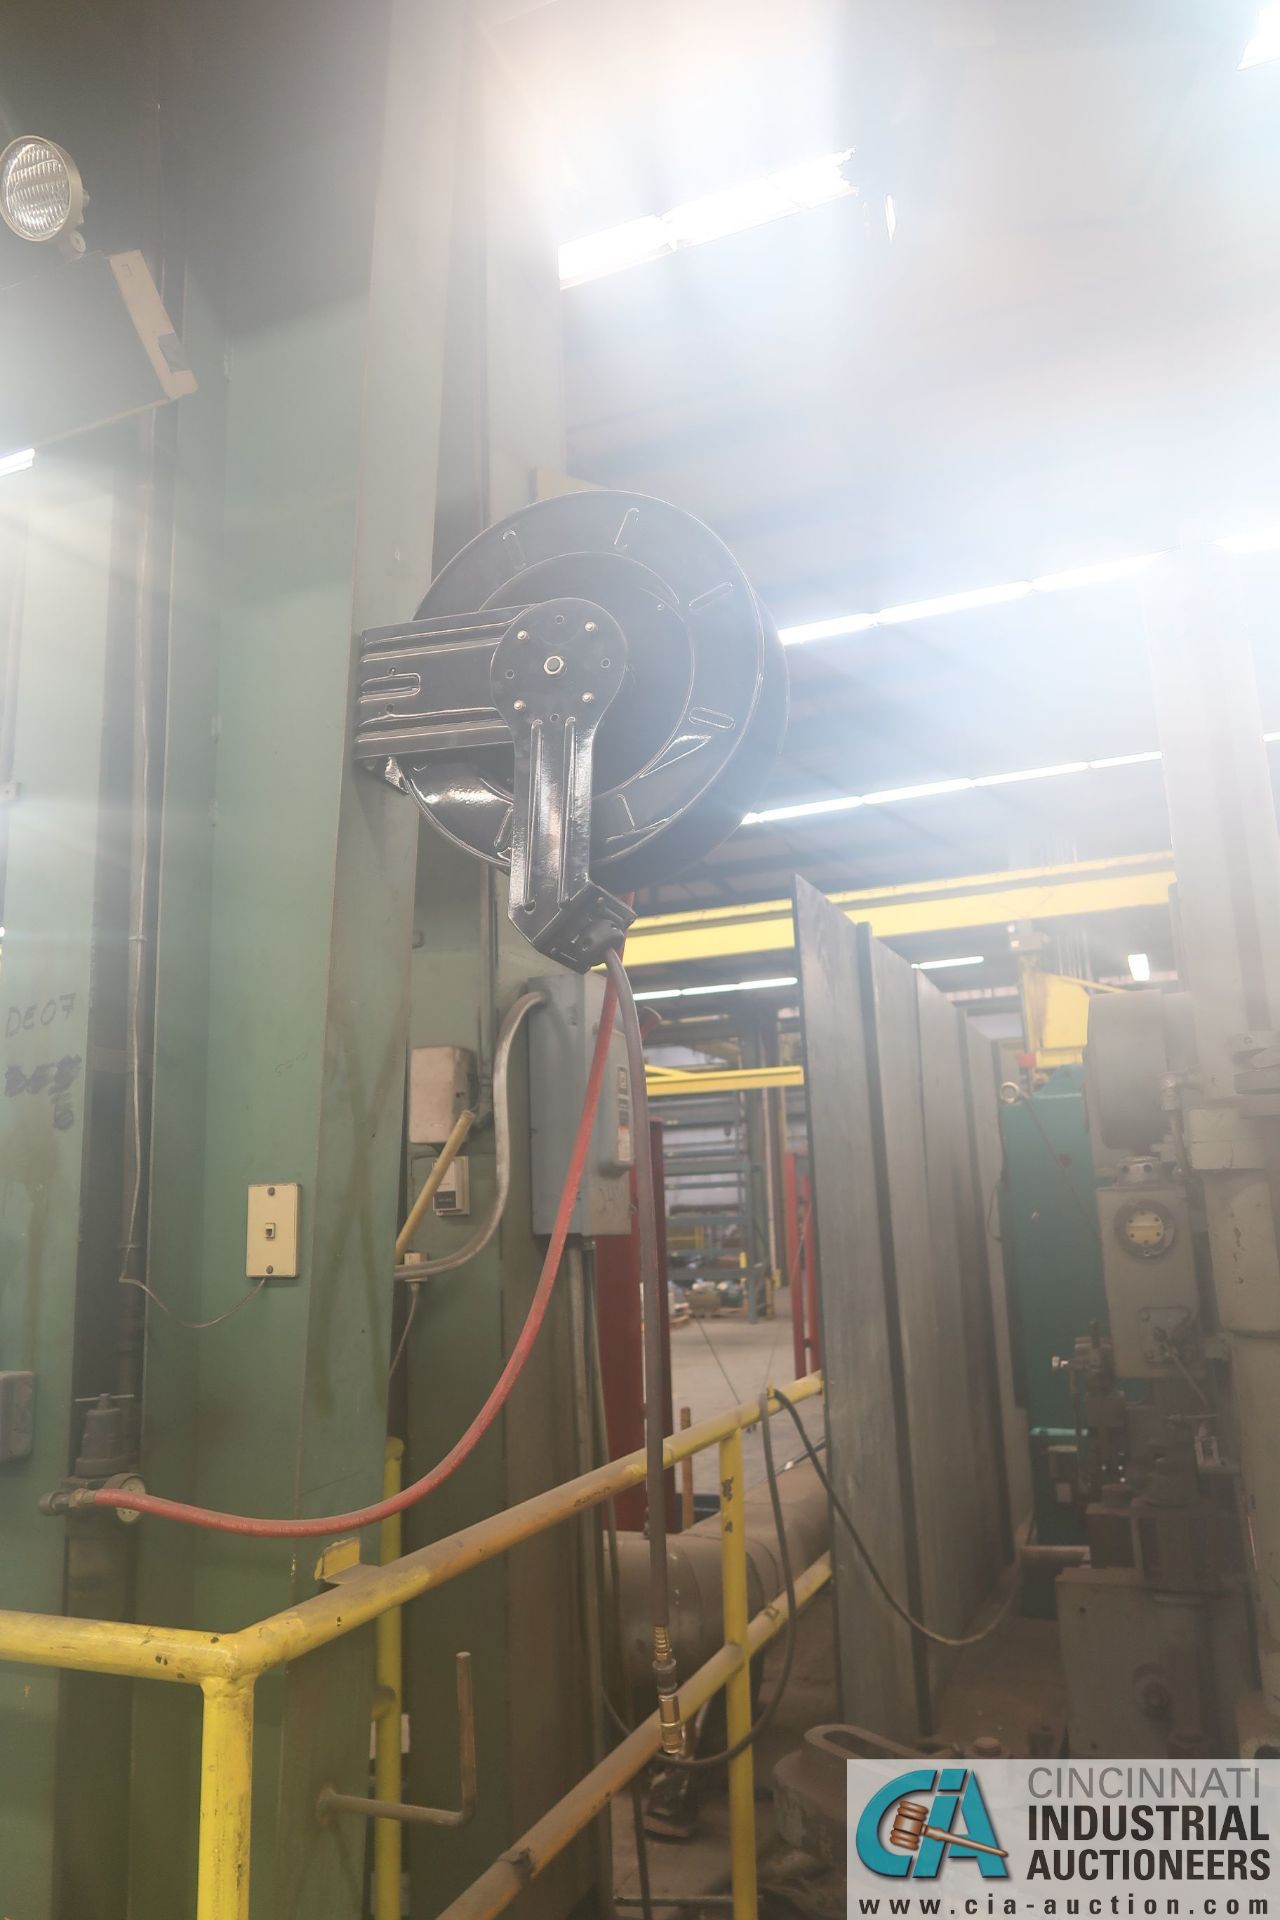 HANGING AIR HOSE REELS THROUGHOUT THE BUILDING